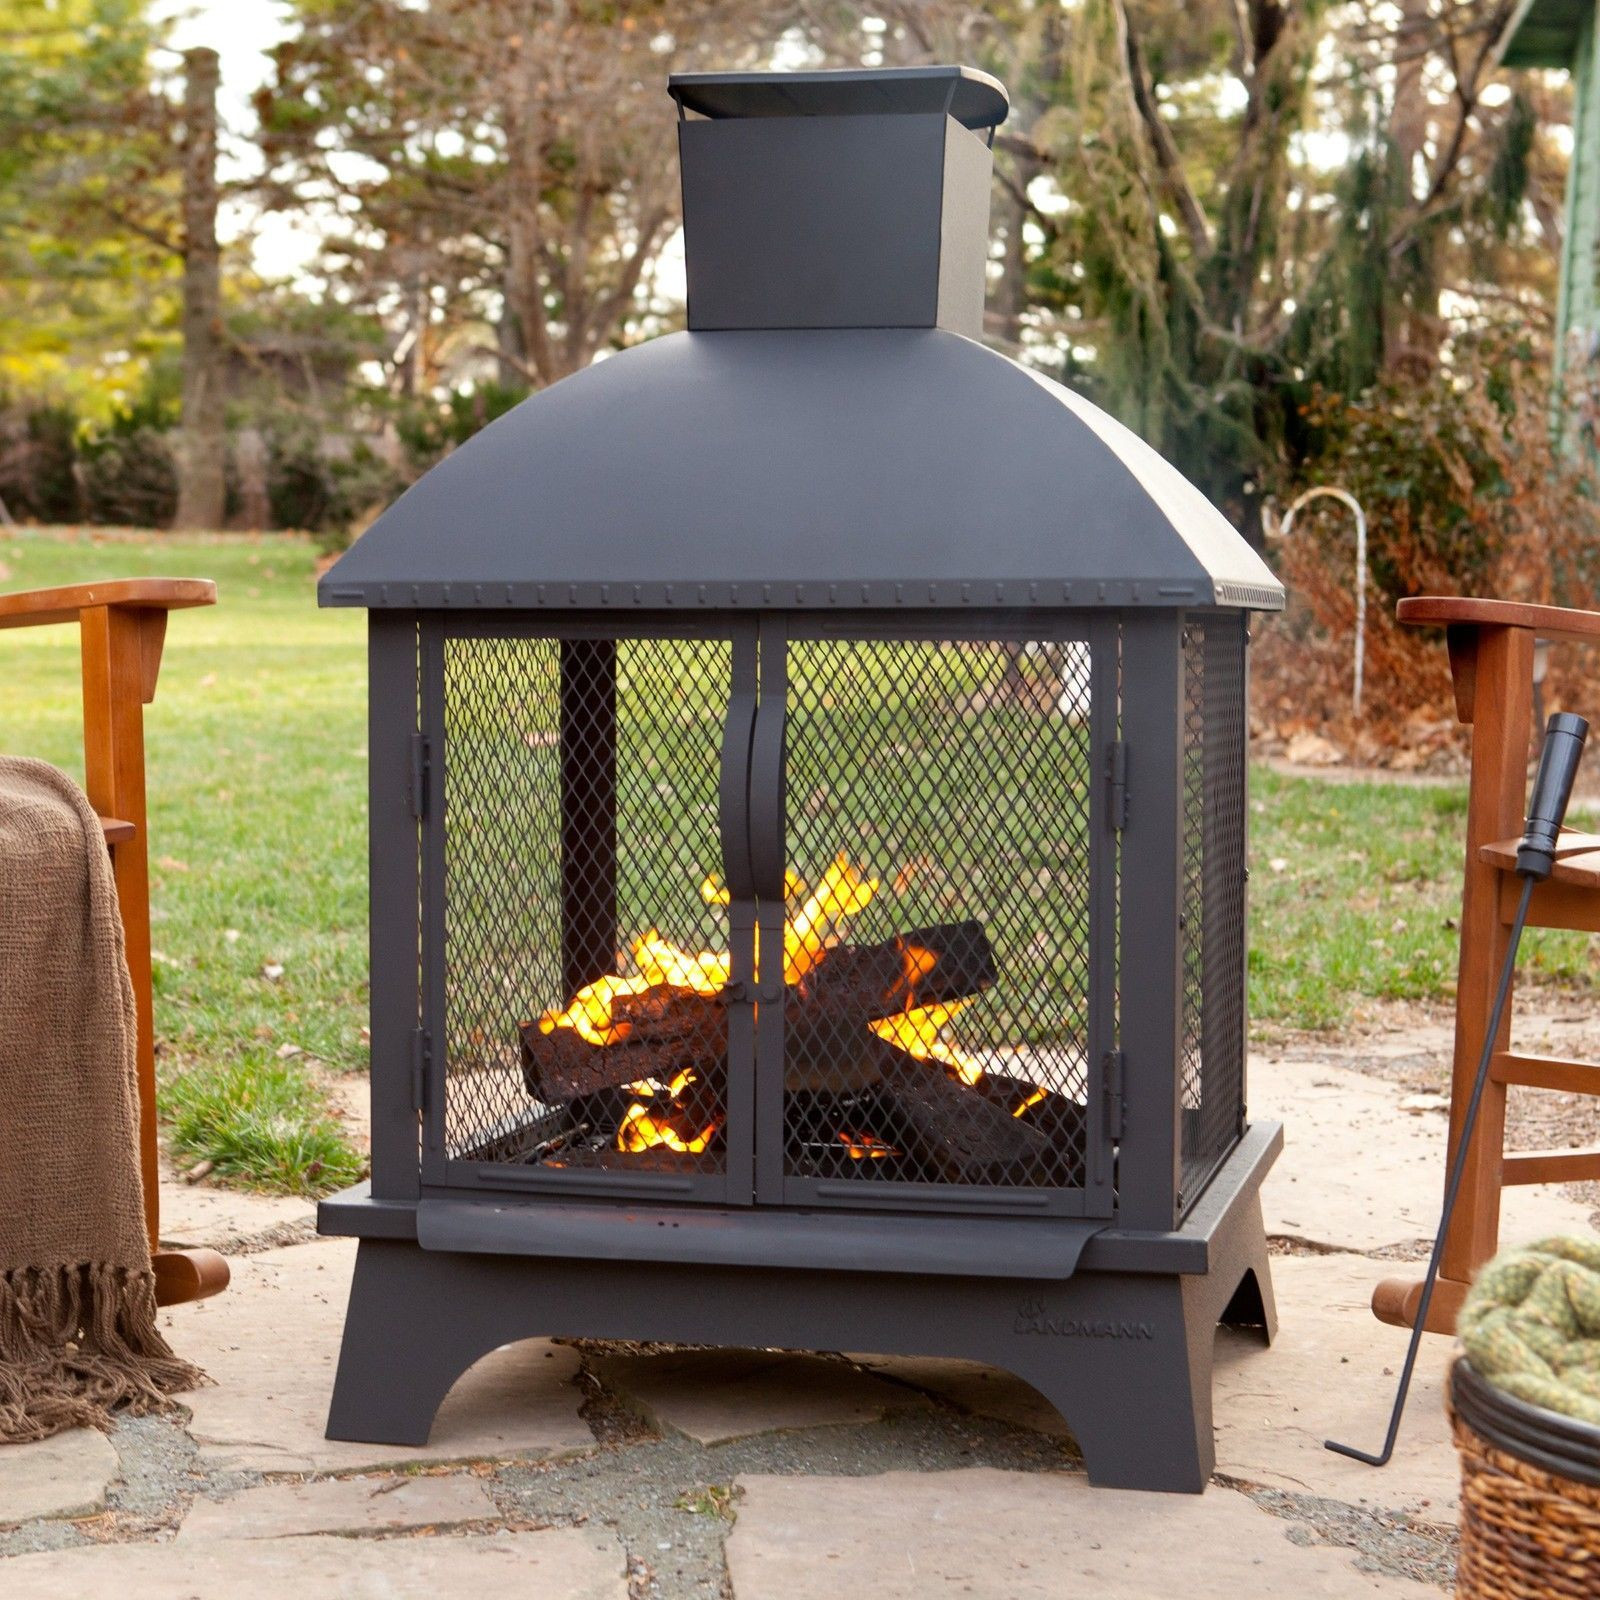 Outdoor Fire Pit Patio
 Outdoor Patio Fireplace Wood Burning Fire Pit Chiminea